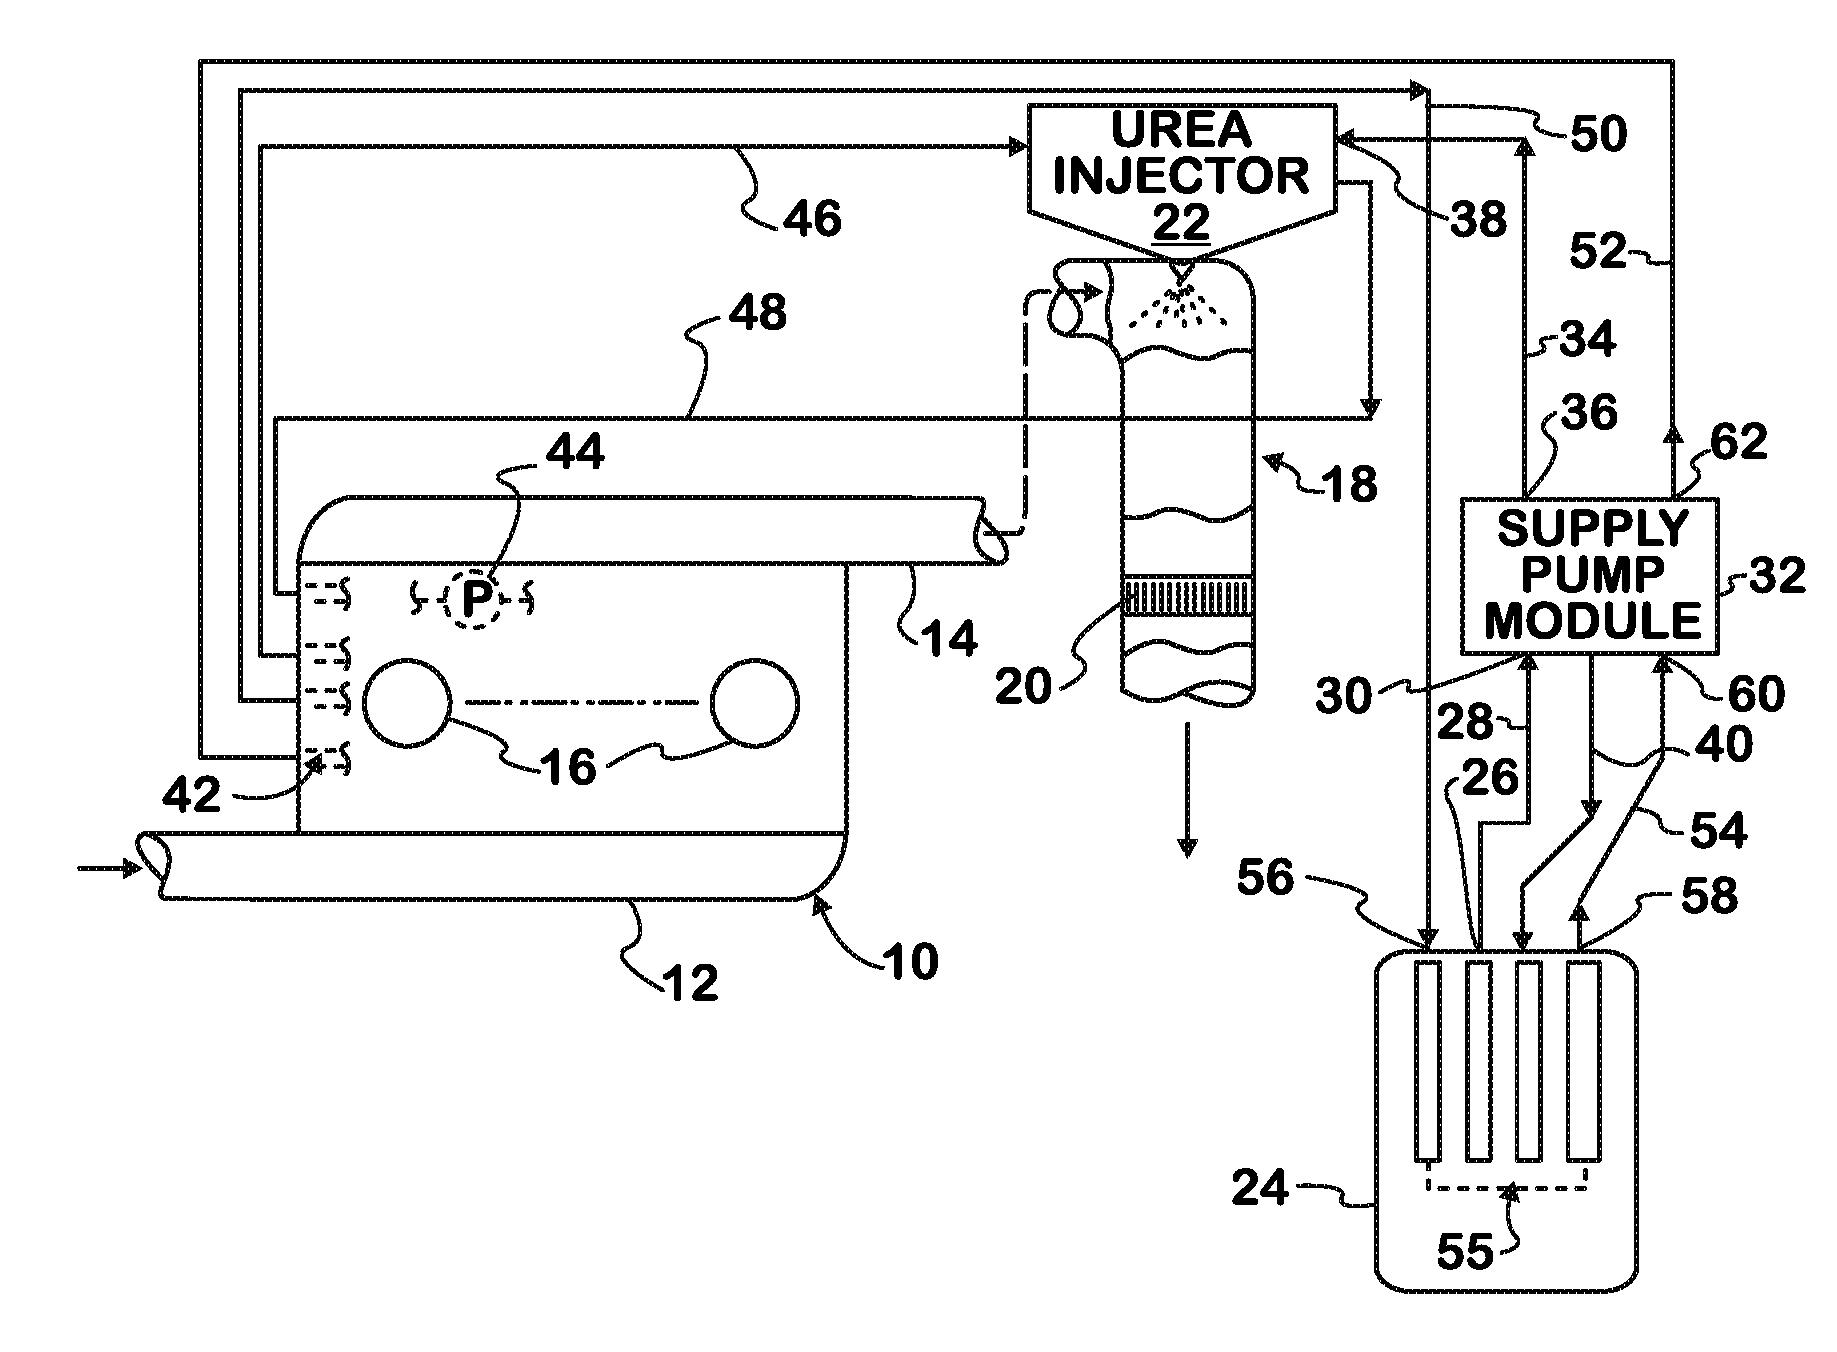 Quick-heating of a urea supply conduit for an engine exhaust after-treatment system